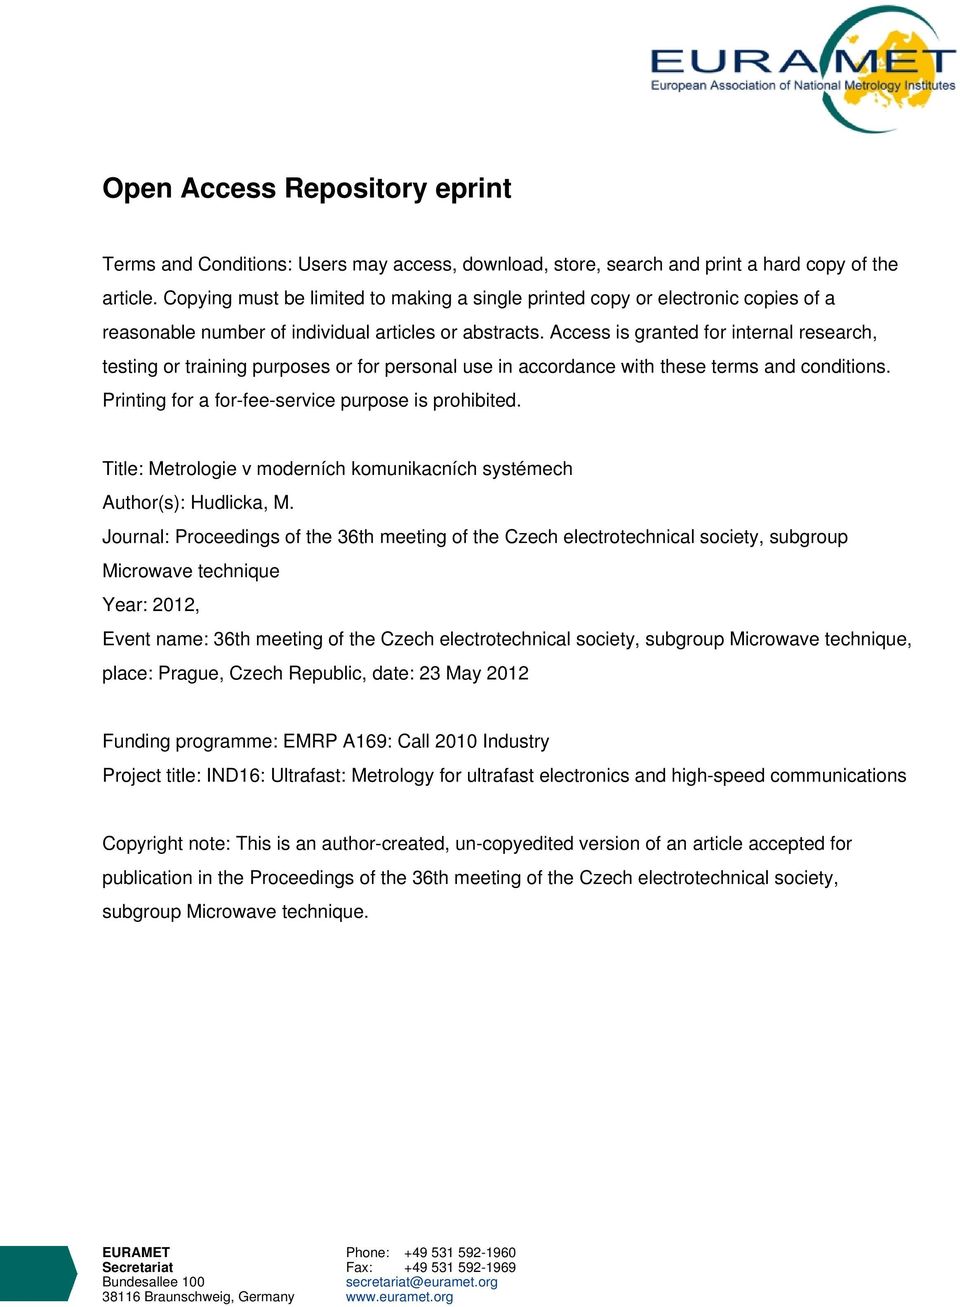 Access is granted for internal research, testing or training purposes or for personal use in accordance with these terms and conditions. Printing for a for-fee-service purpose is prohibited.